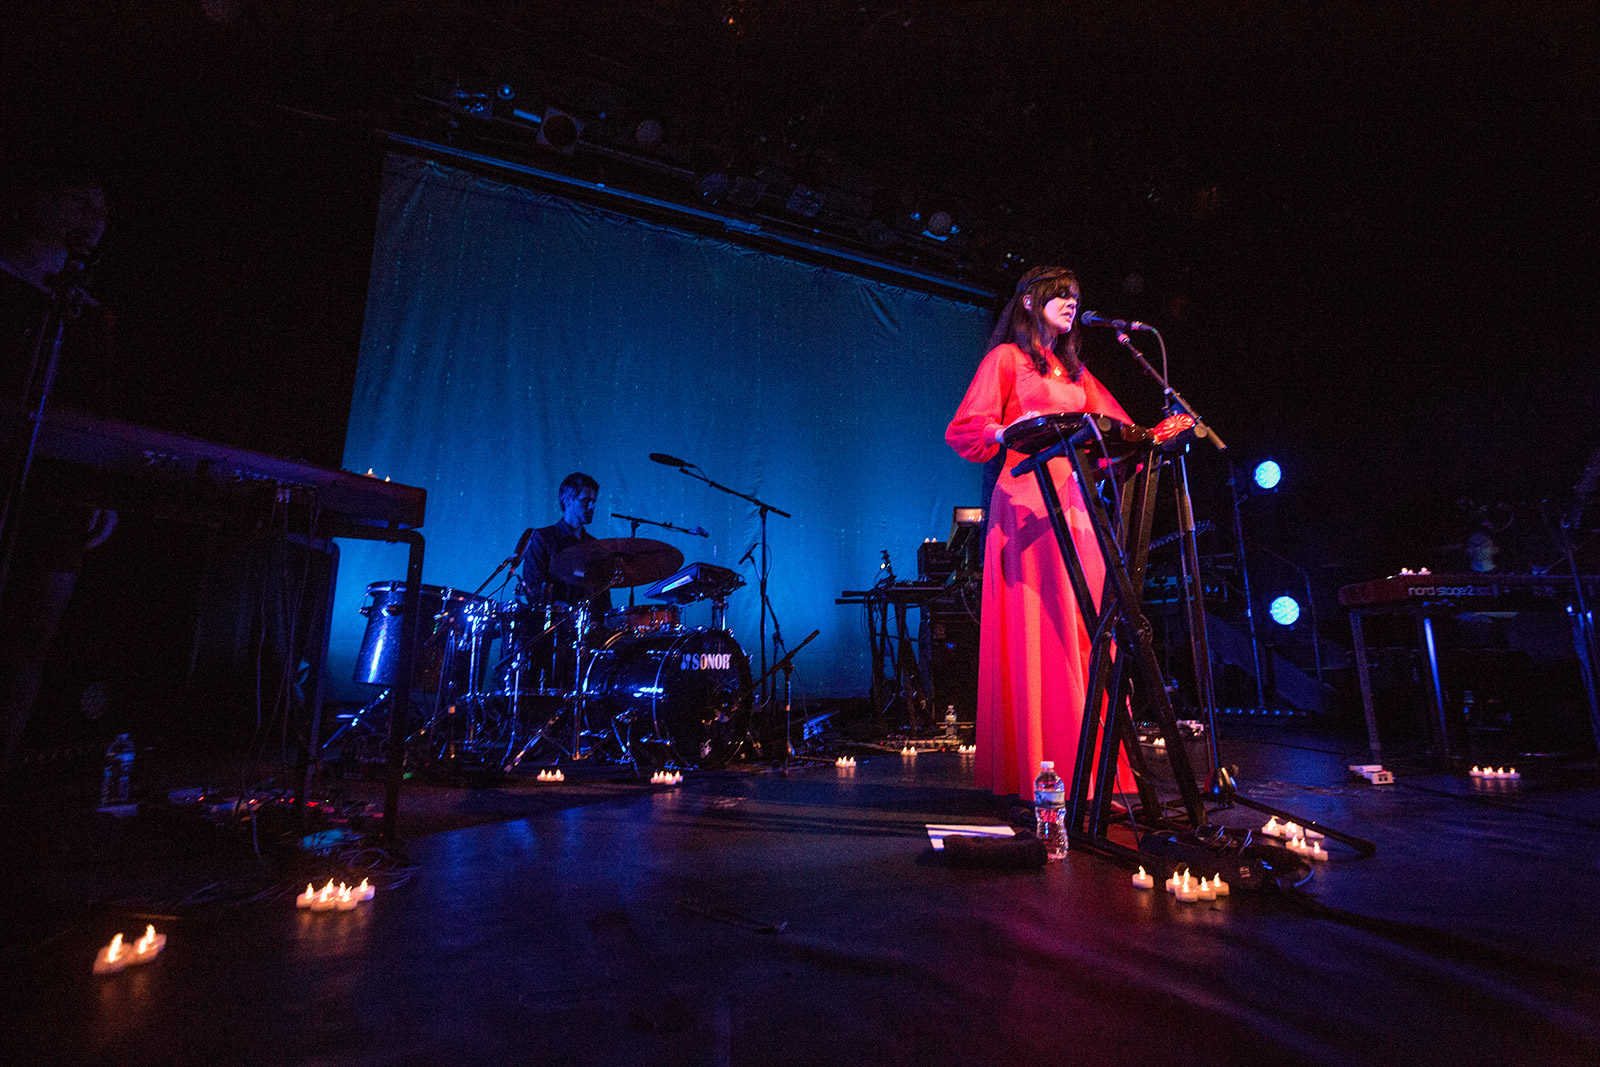 Bat for Lashes at Music Hall of Williamsburg